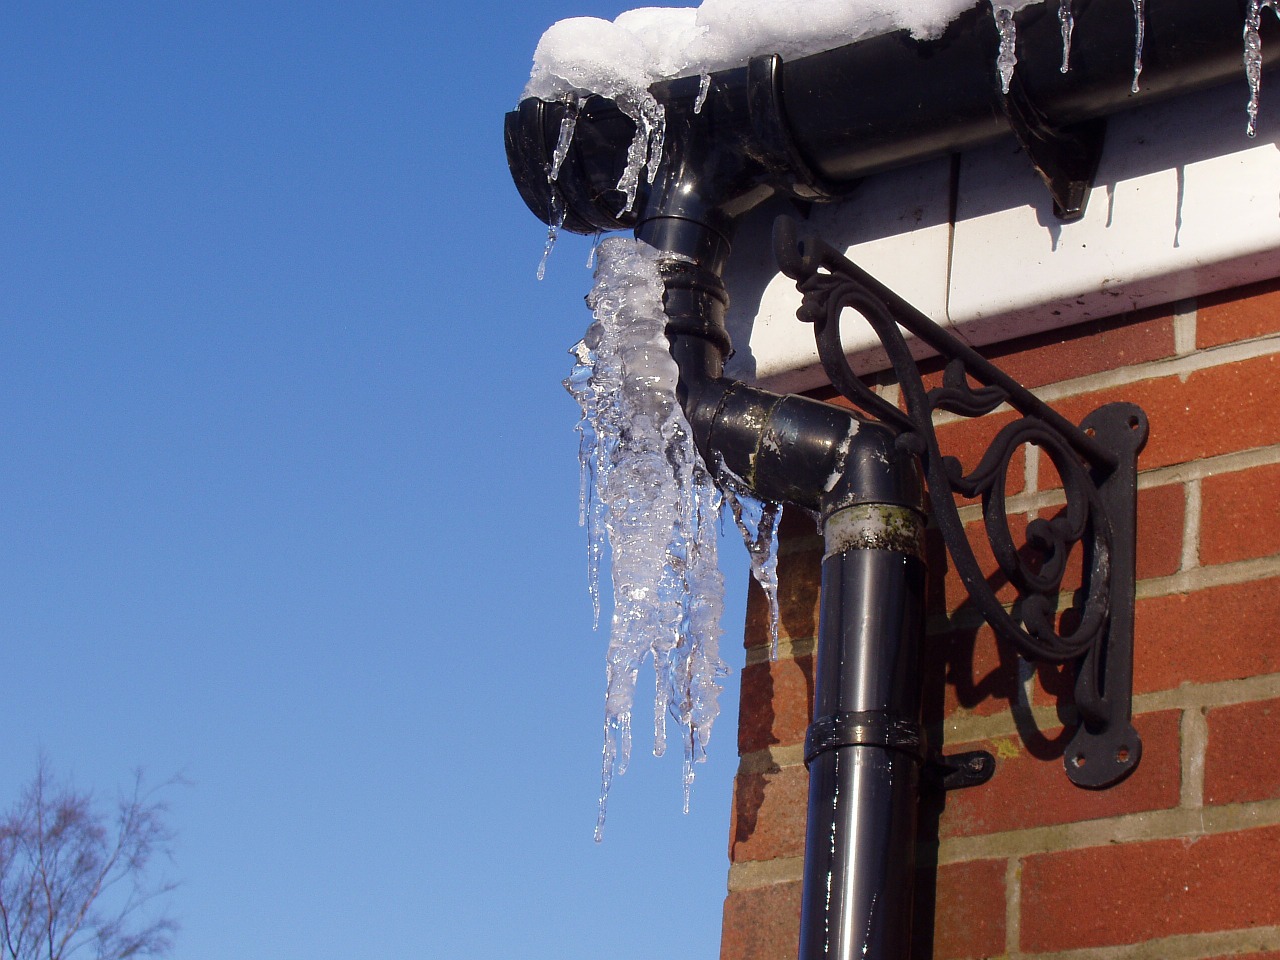 How to thaw frozen pipes